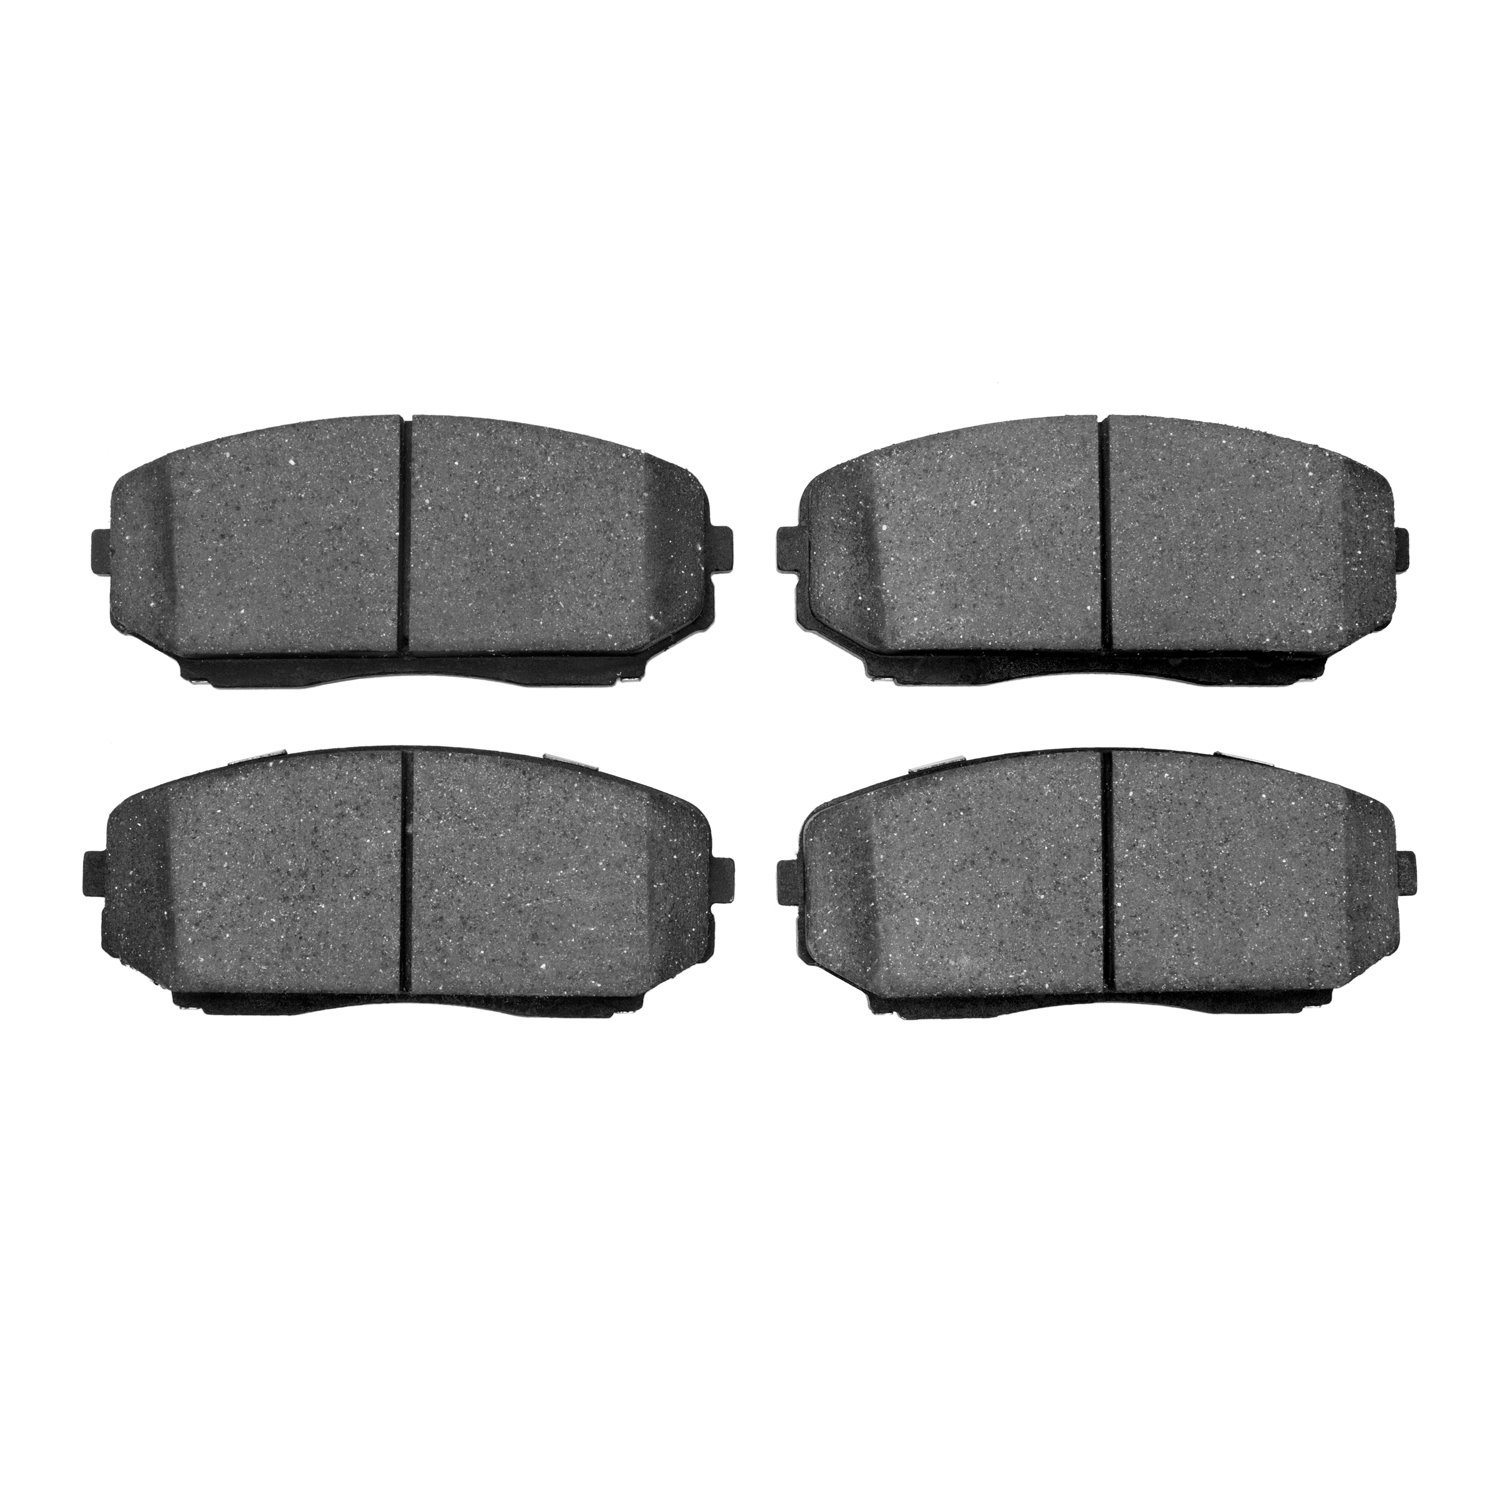 Optimum OE Brake Pads, Fits Select Ford/Lincoln/Mercury/Mazda, Position: Front